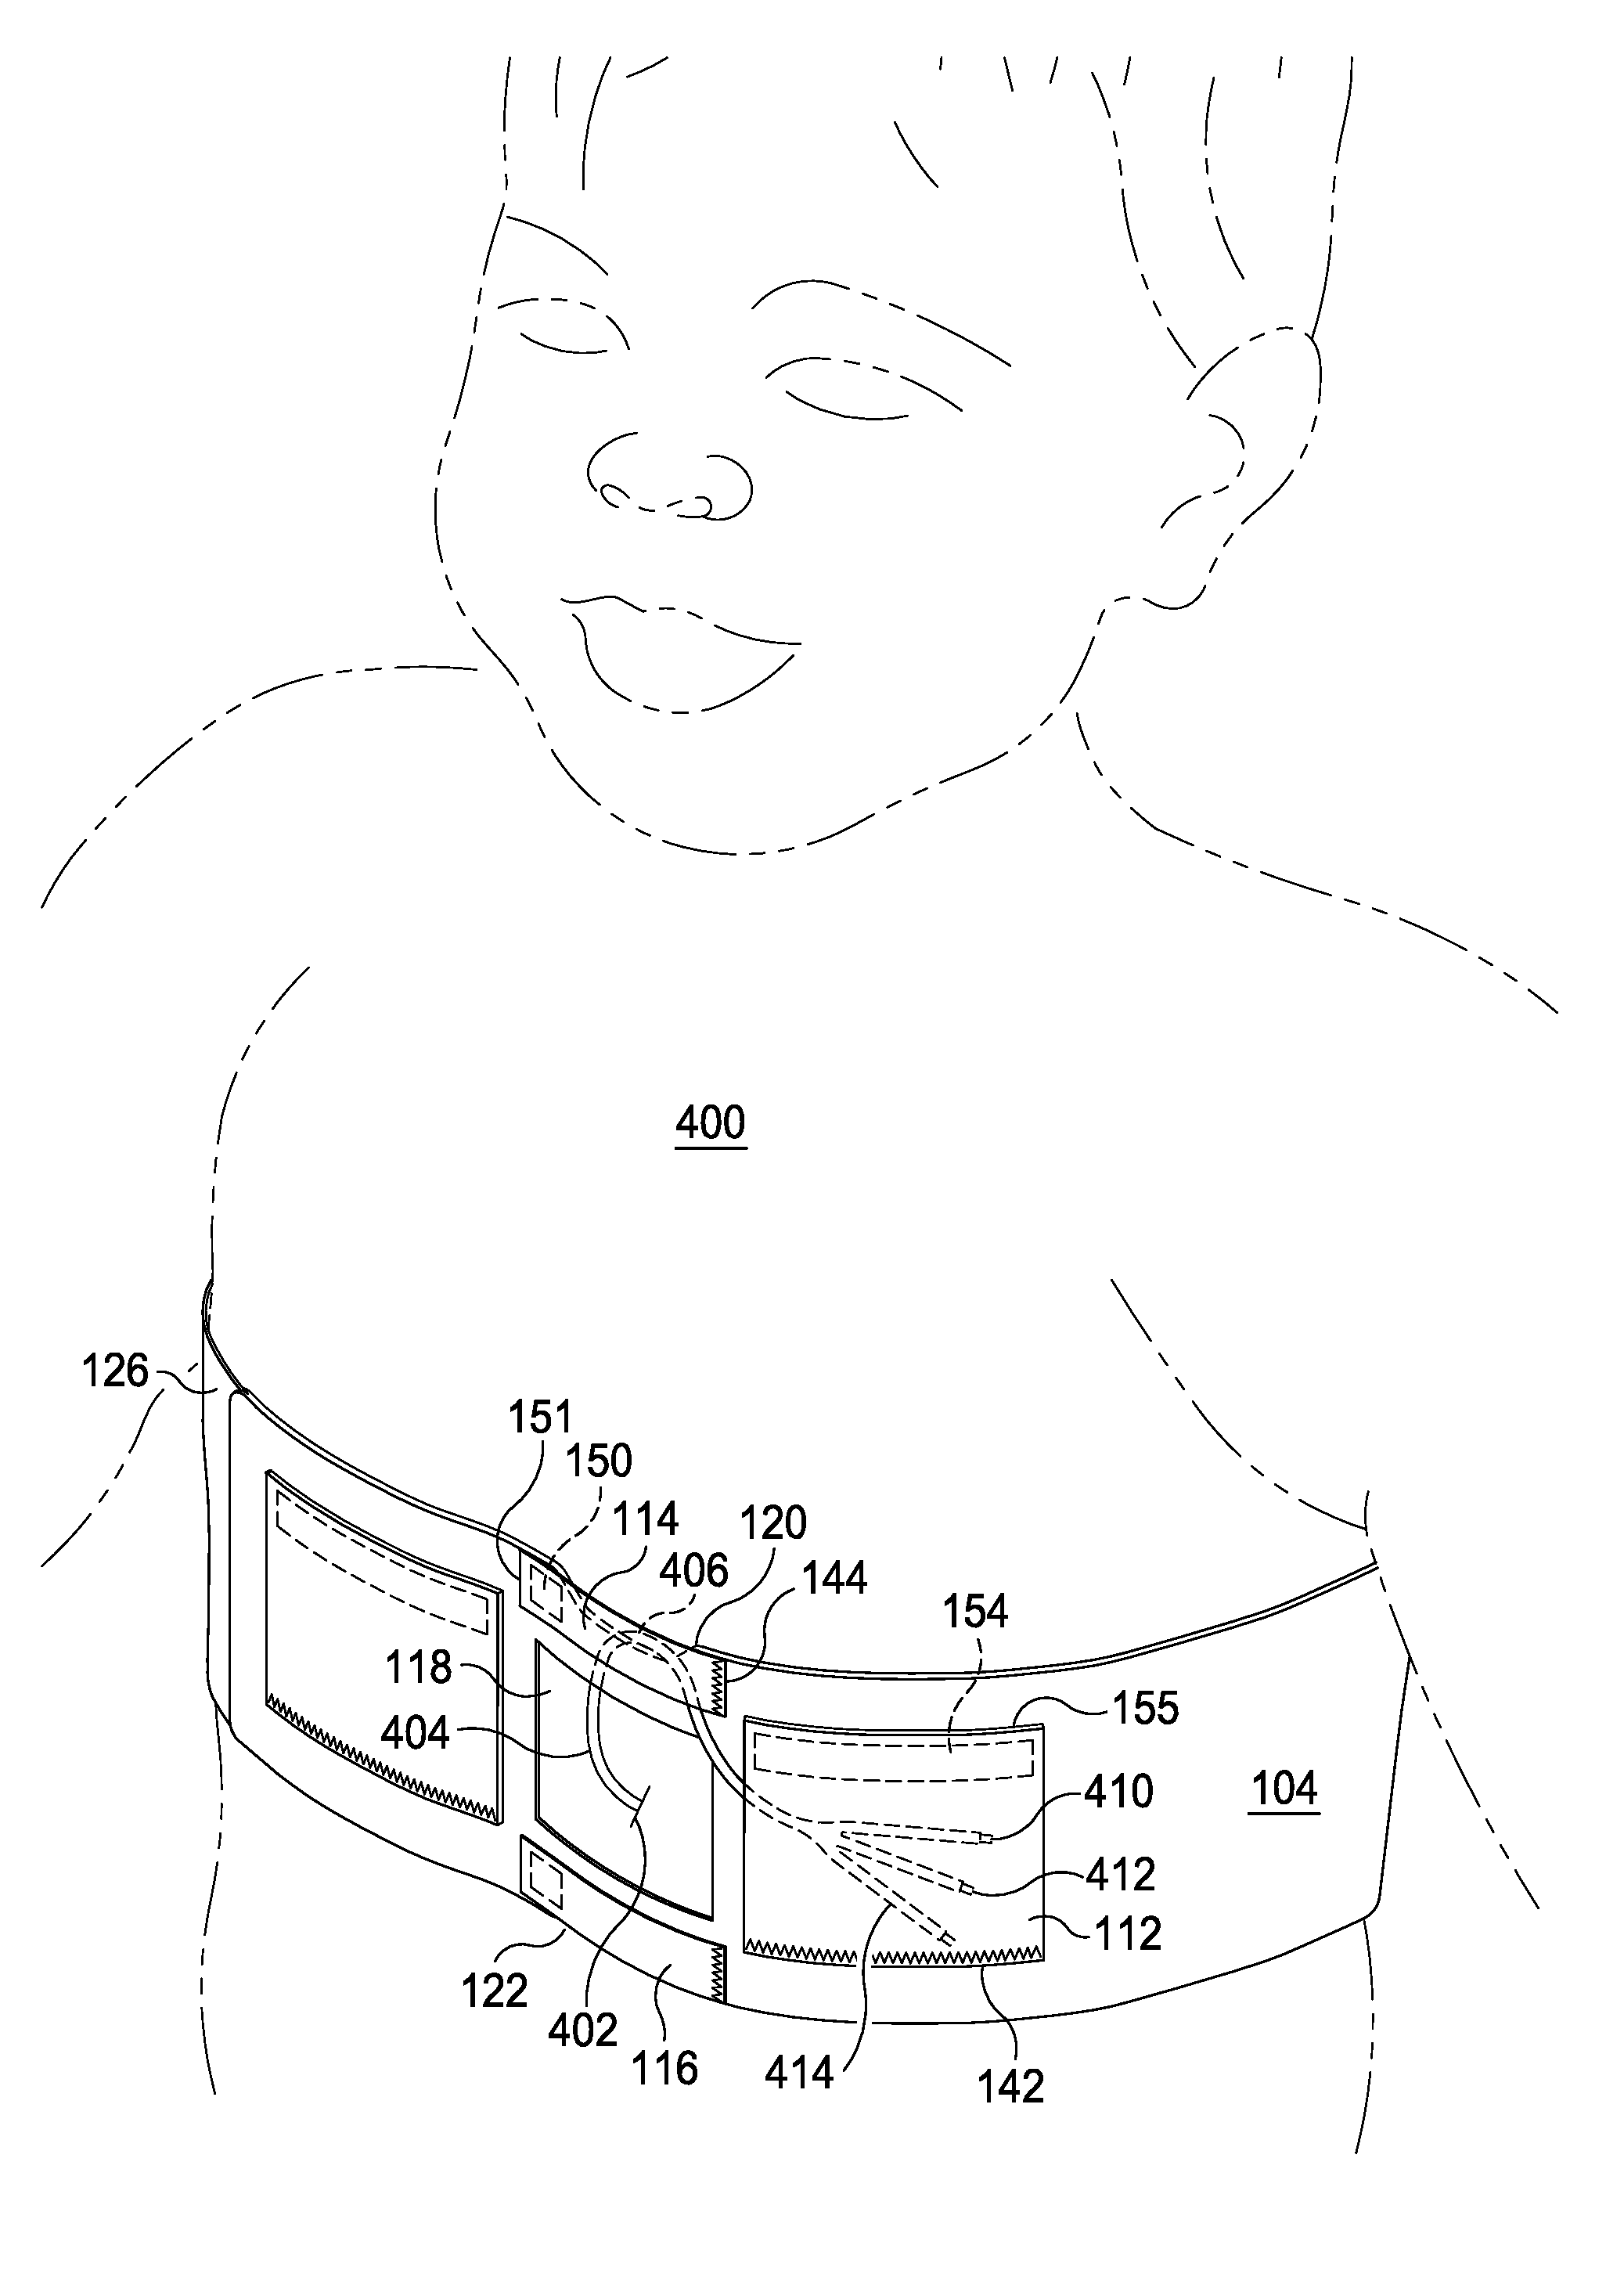 Apparatus and method for controlling visibility and access to central venous access devices